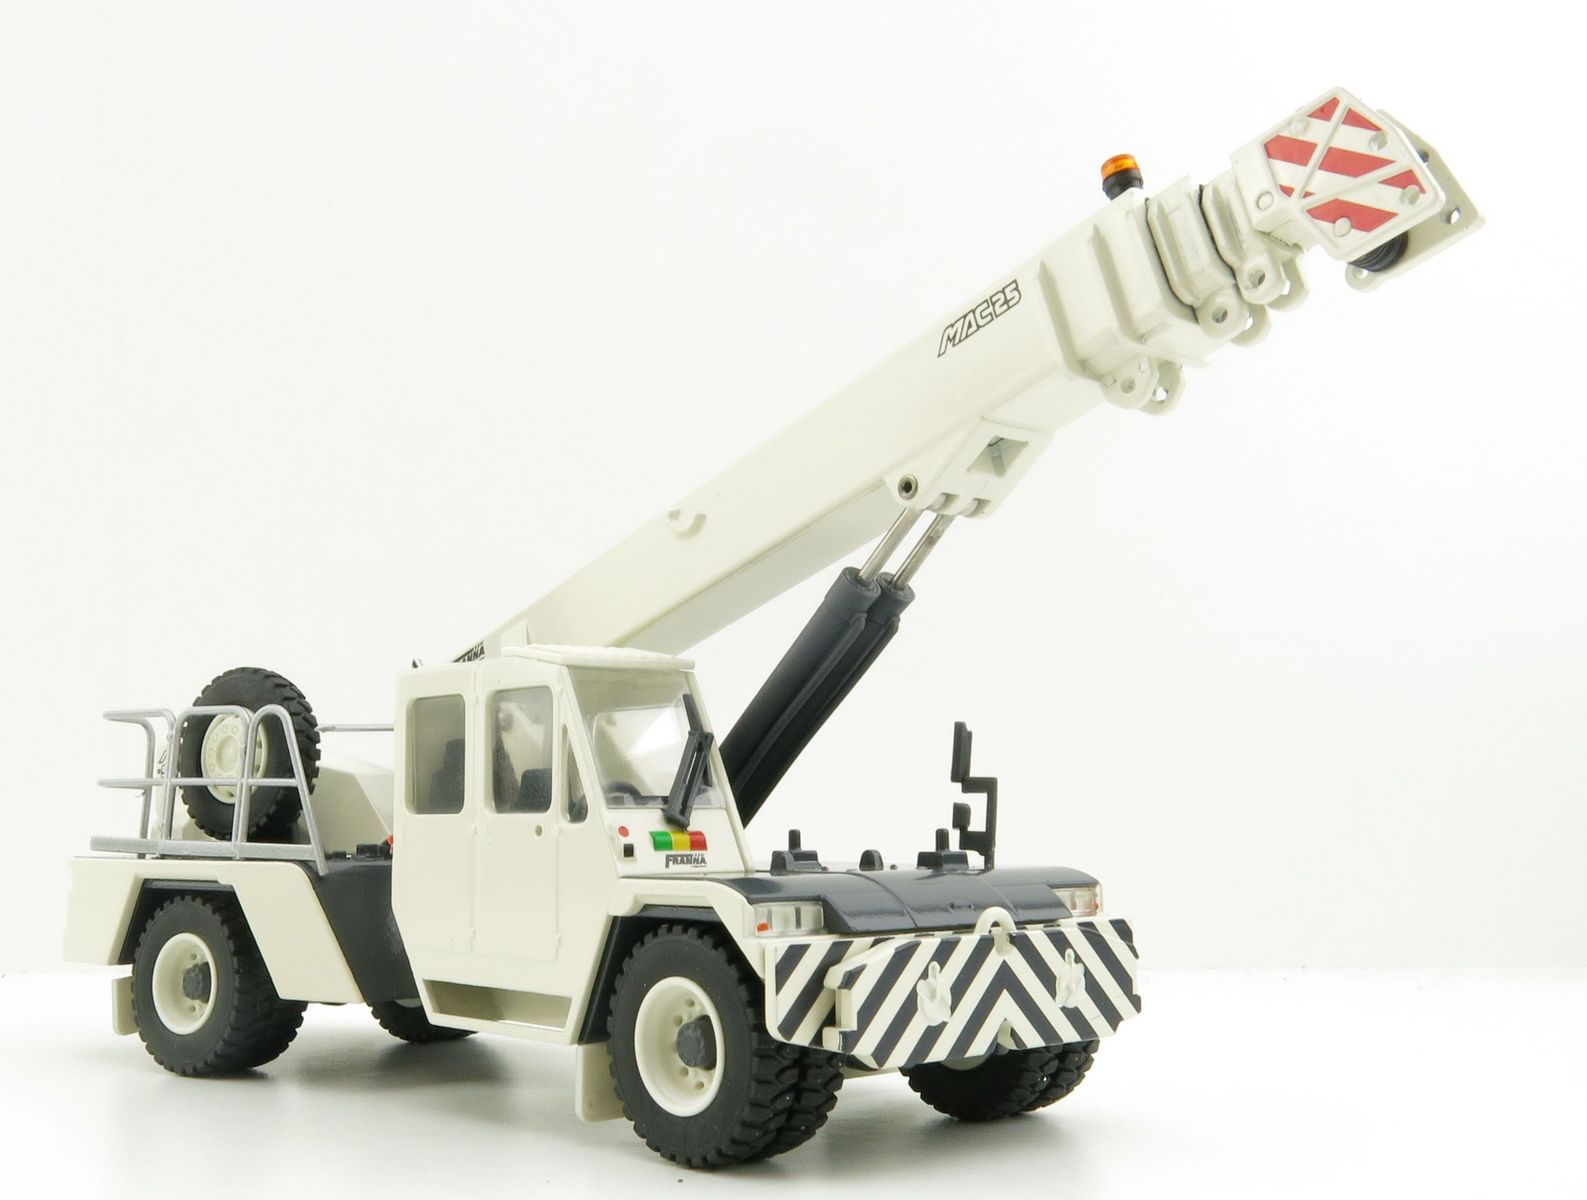 Product Image - Conrad 2122/0 - TEREX Franna MAC25 Pick and Carry Mobile Crane New 2022 - Scale 1:50